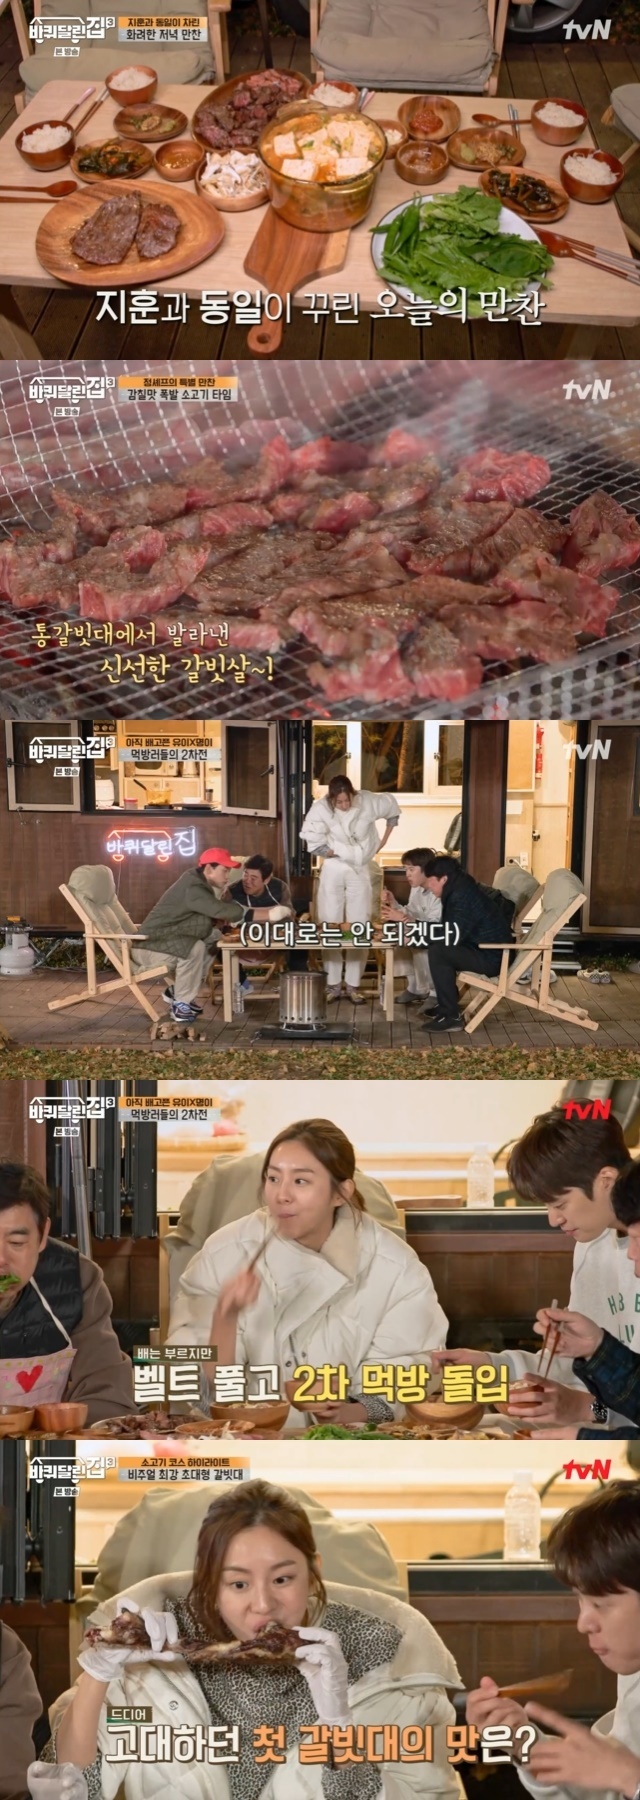 Uee showed off the storm food by releasing the belt.In the 8th episode of TVNs entertainment House with Wheels (hereinafter referred to as House 3), which was broadcast on December 9, the River One of the family members of the Badal house with Actor Rain (Rain) and Uee was also drawn on the healing trip in Hongcheon County.At the dinner, Sung Dong-il and Rain set up a lot of dinner with pine rice with natural pine, mackerel stew, and short ribs.Uee was praised by Sung Dong-il for Uee really knows how to eat with the way she ate pine and beef together.Uee, who started the food in earnest, ate a bite of soup and a piece of meat from the mackerel stew and rolled his feet.Sung Dong-il said, Uee you roll your feet if you like something. Uee re-catched it and said, Yes, if it is too good.Uee, who tasted various foods, touched the clothes as if it were uncomfortable somewhere, and suddenly got up and focused his attention on the belt without worrying about the surroundings.